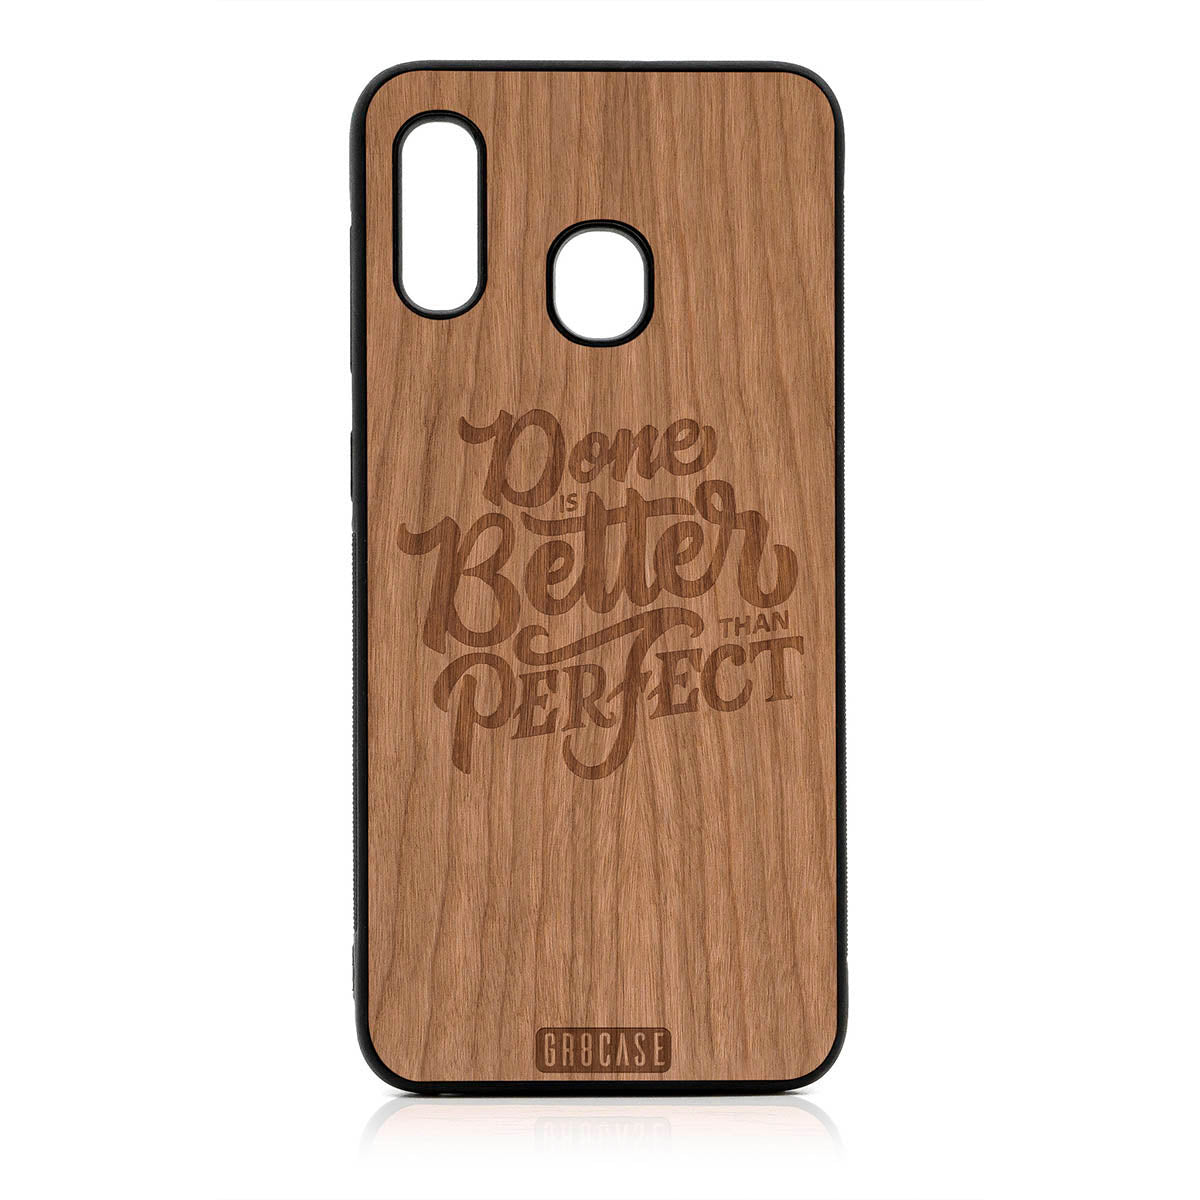 Done Is Better Than Perfect Design Wood Case For Samsung Galaxy A20 by GR8CASE